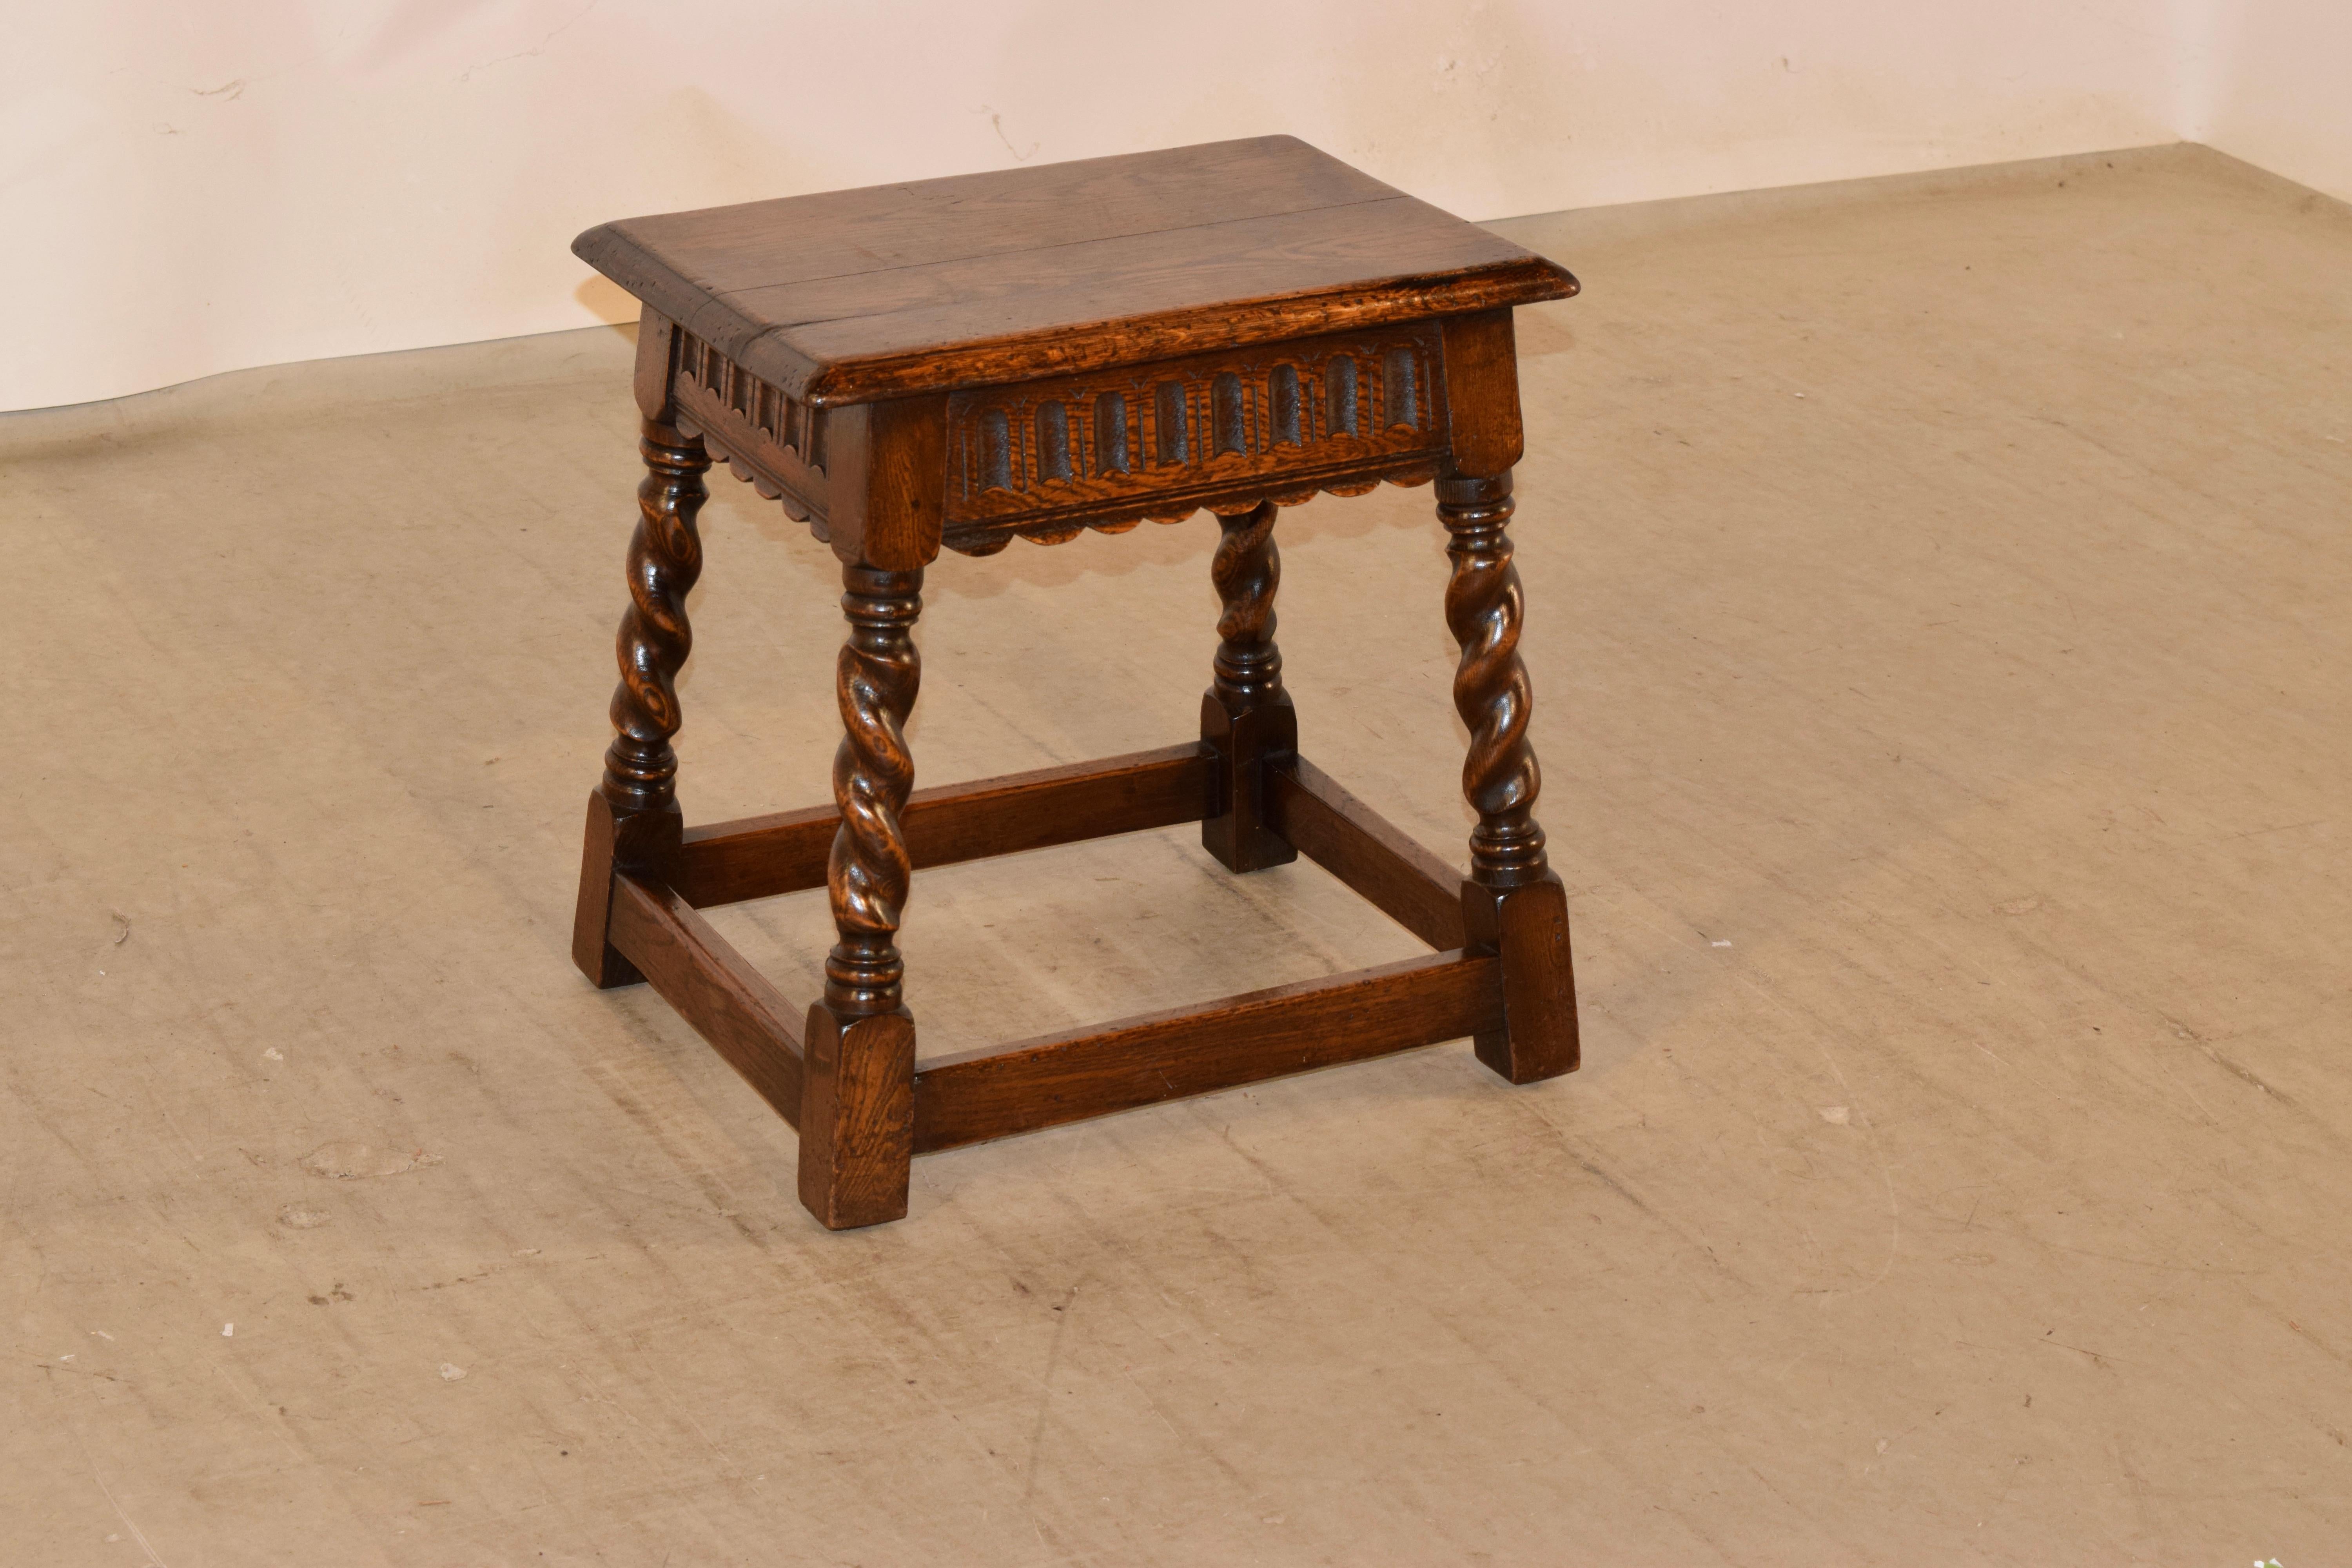 19th century oak stool from England with a beveled edge around the top over a hand carved and scalloped apron and supported on hand turned barley twist splayed legs, joined by simple stretchers.